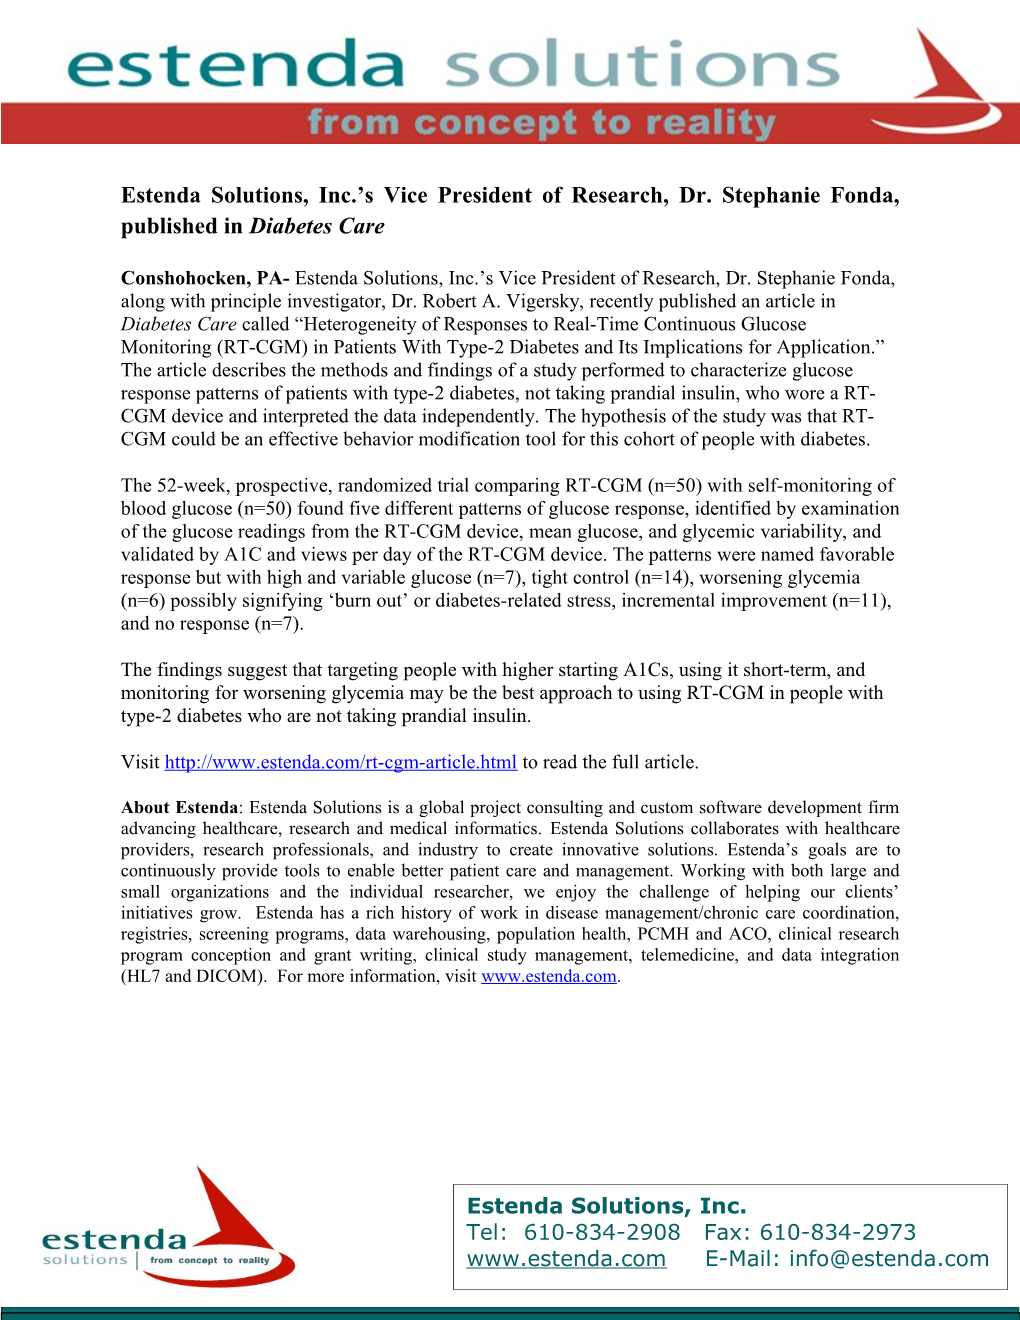 Estenda Solutions, Inc. S Vice President of Research, Dr. Stephanie Fonda, Published In